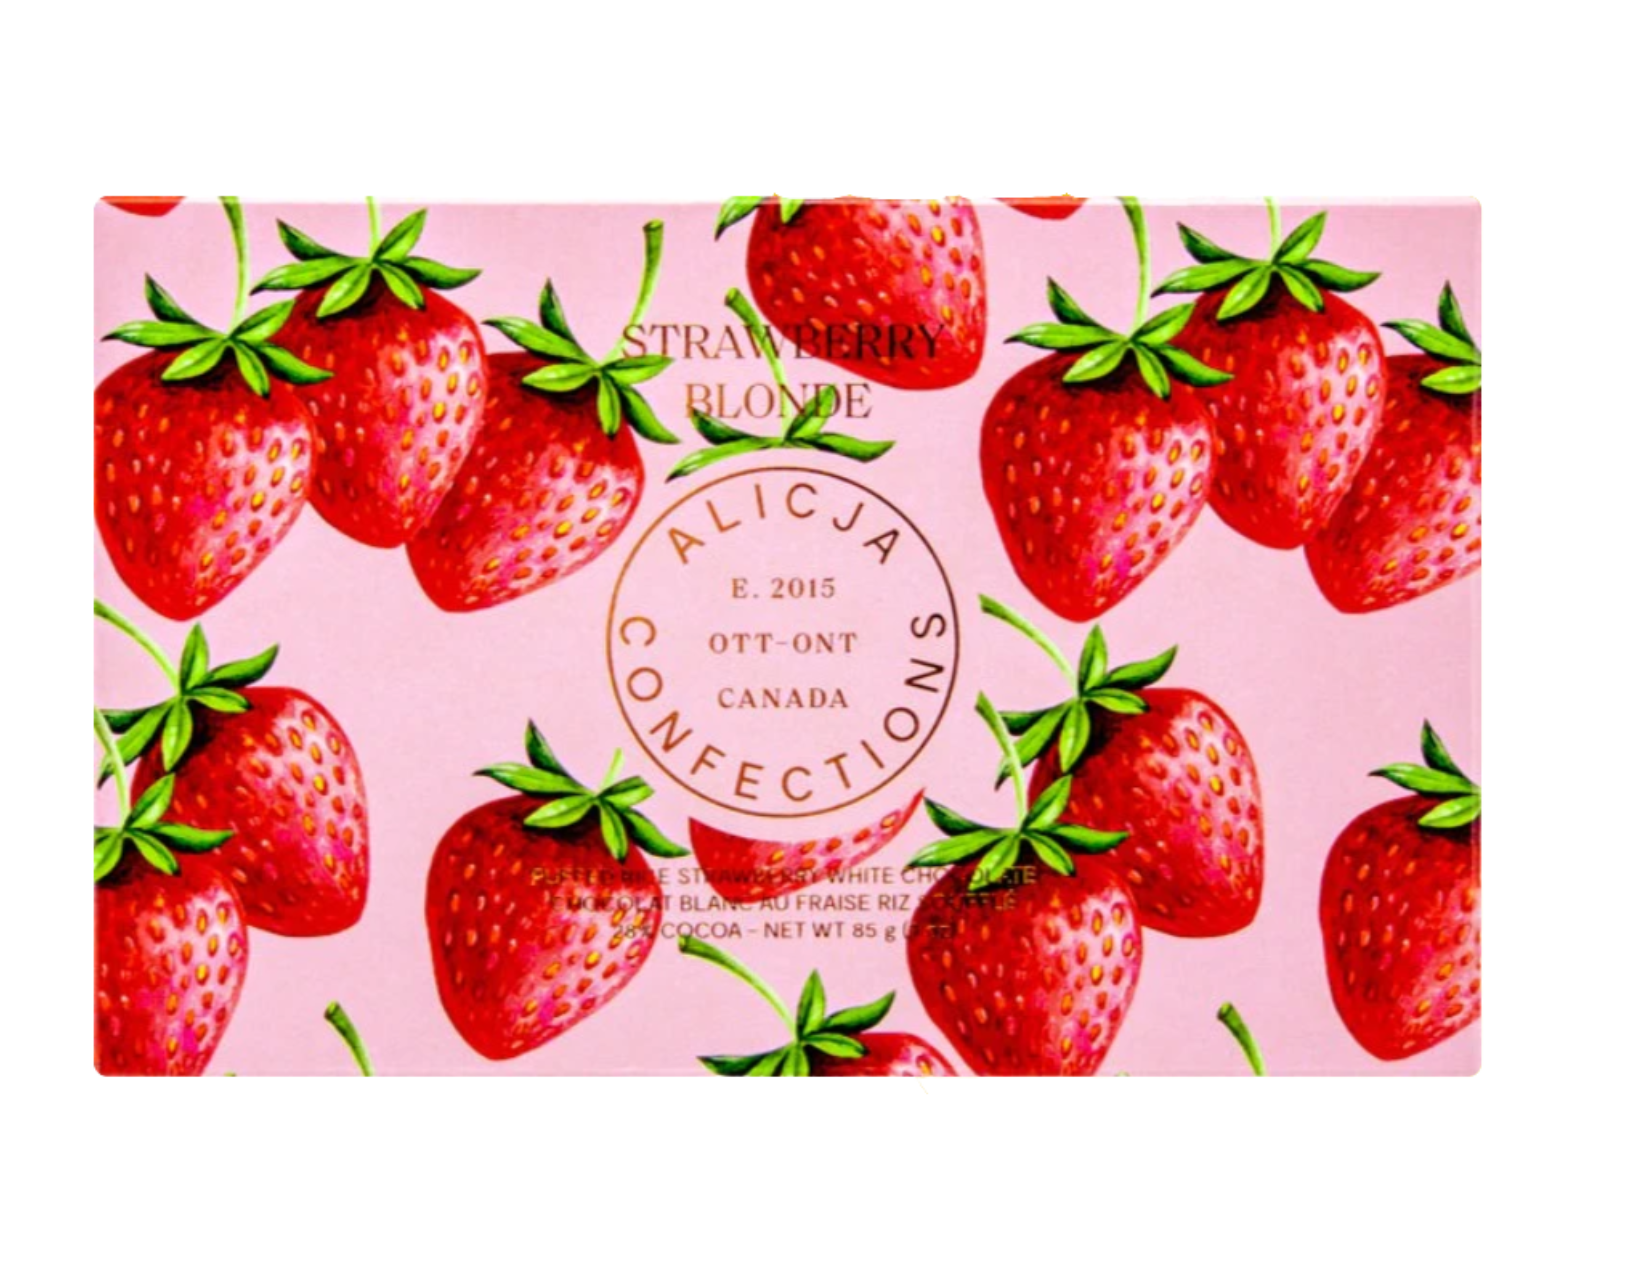 Alicja Confections Strawberry Blonde Puffed Rice and Strawberry 28% White Chocolate